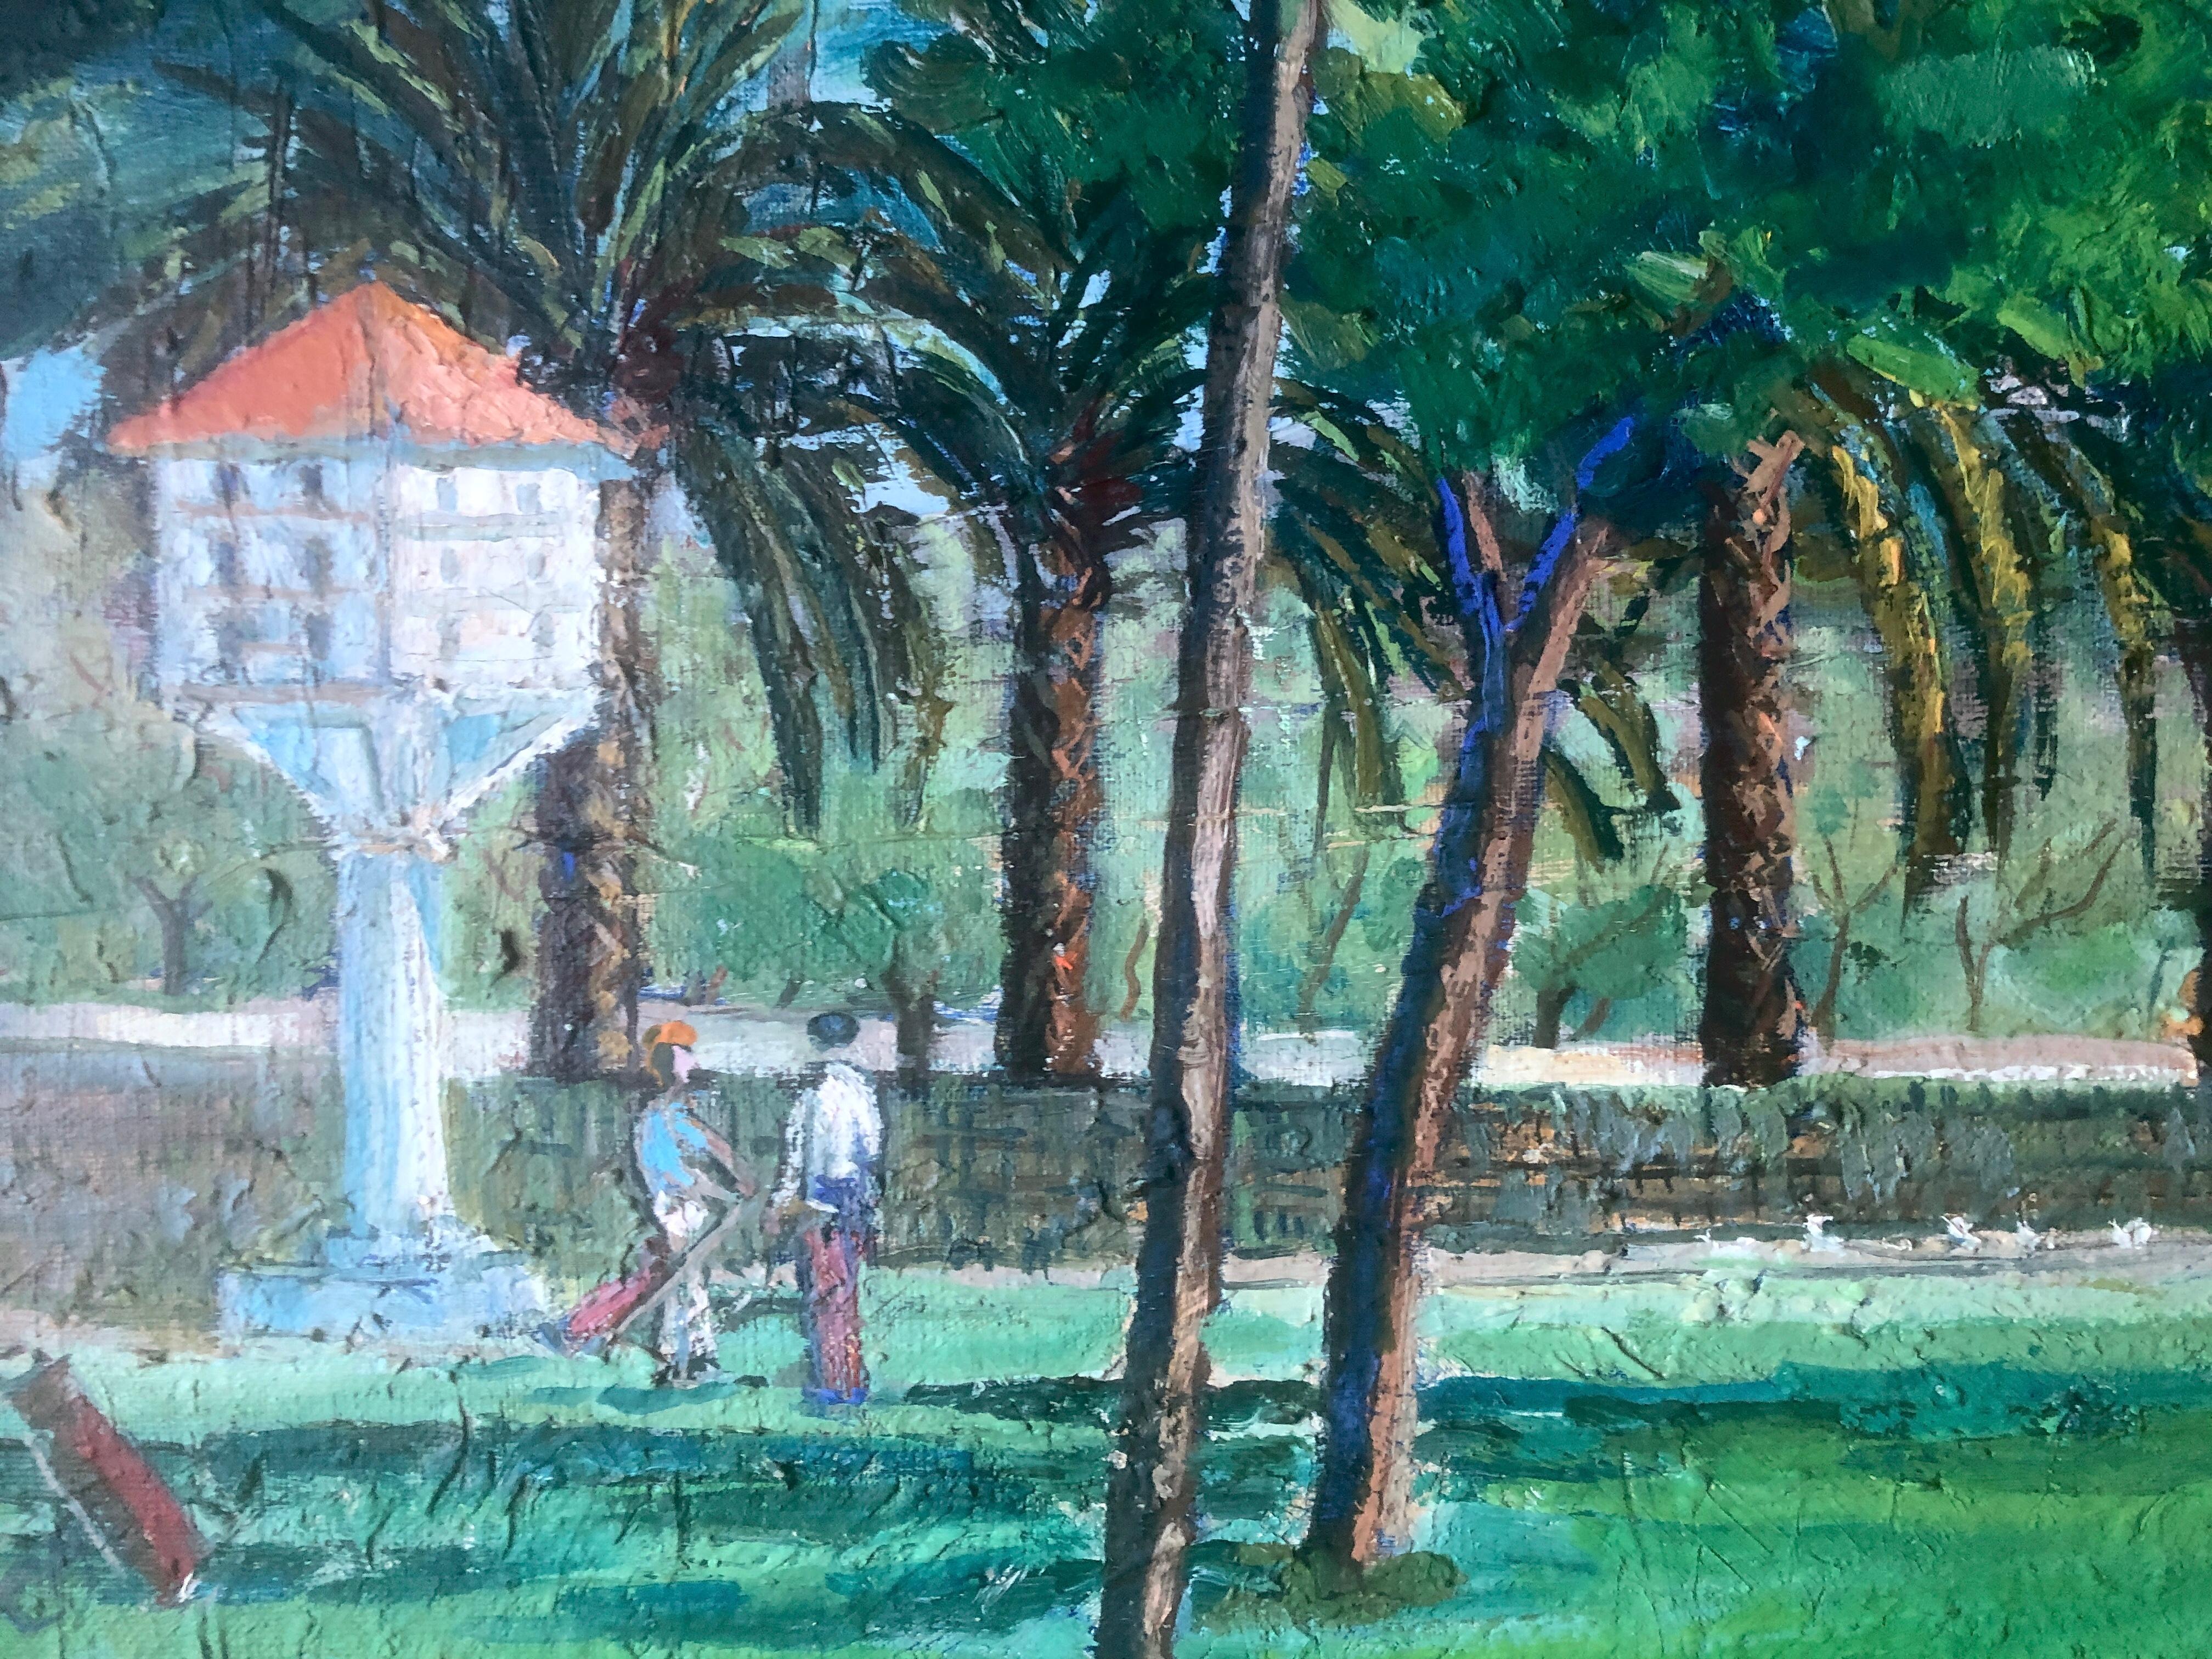 Golf players oil on canvas painting terramar sitges spain - Impressionist Painting by Unknown